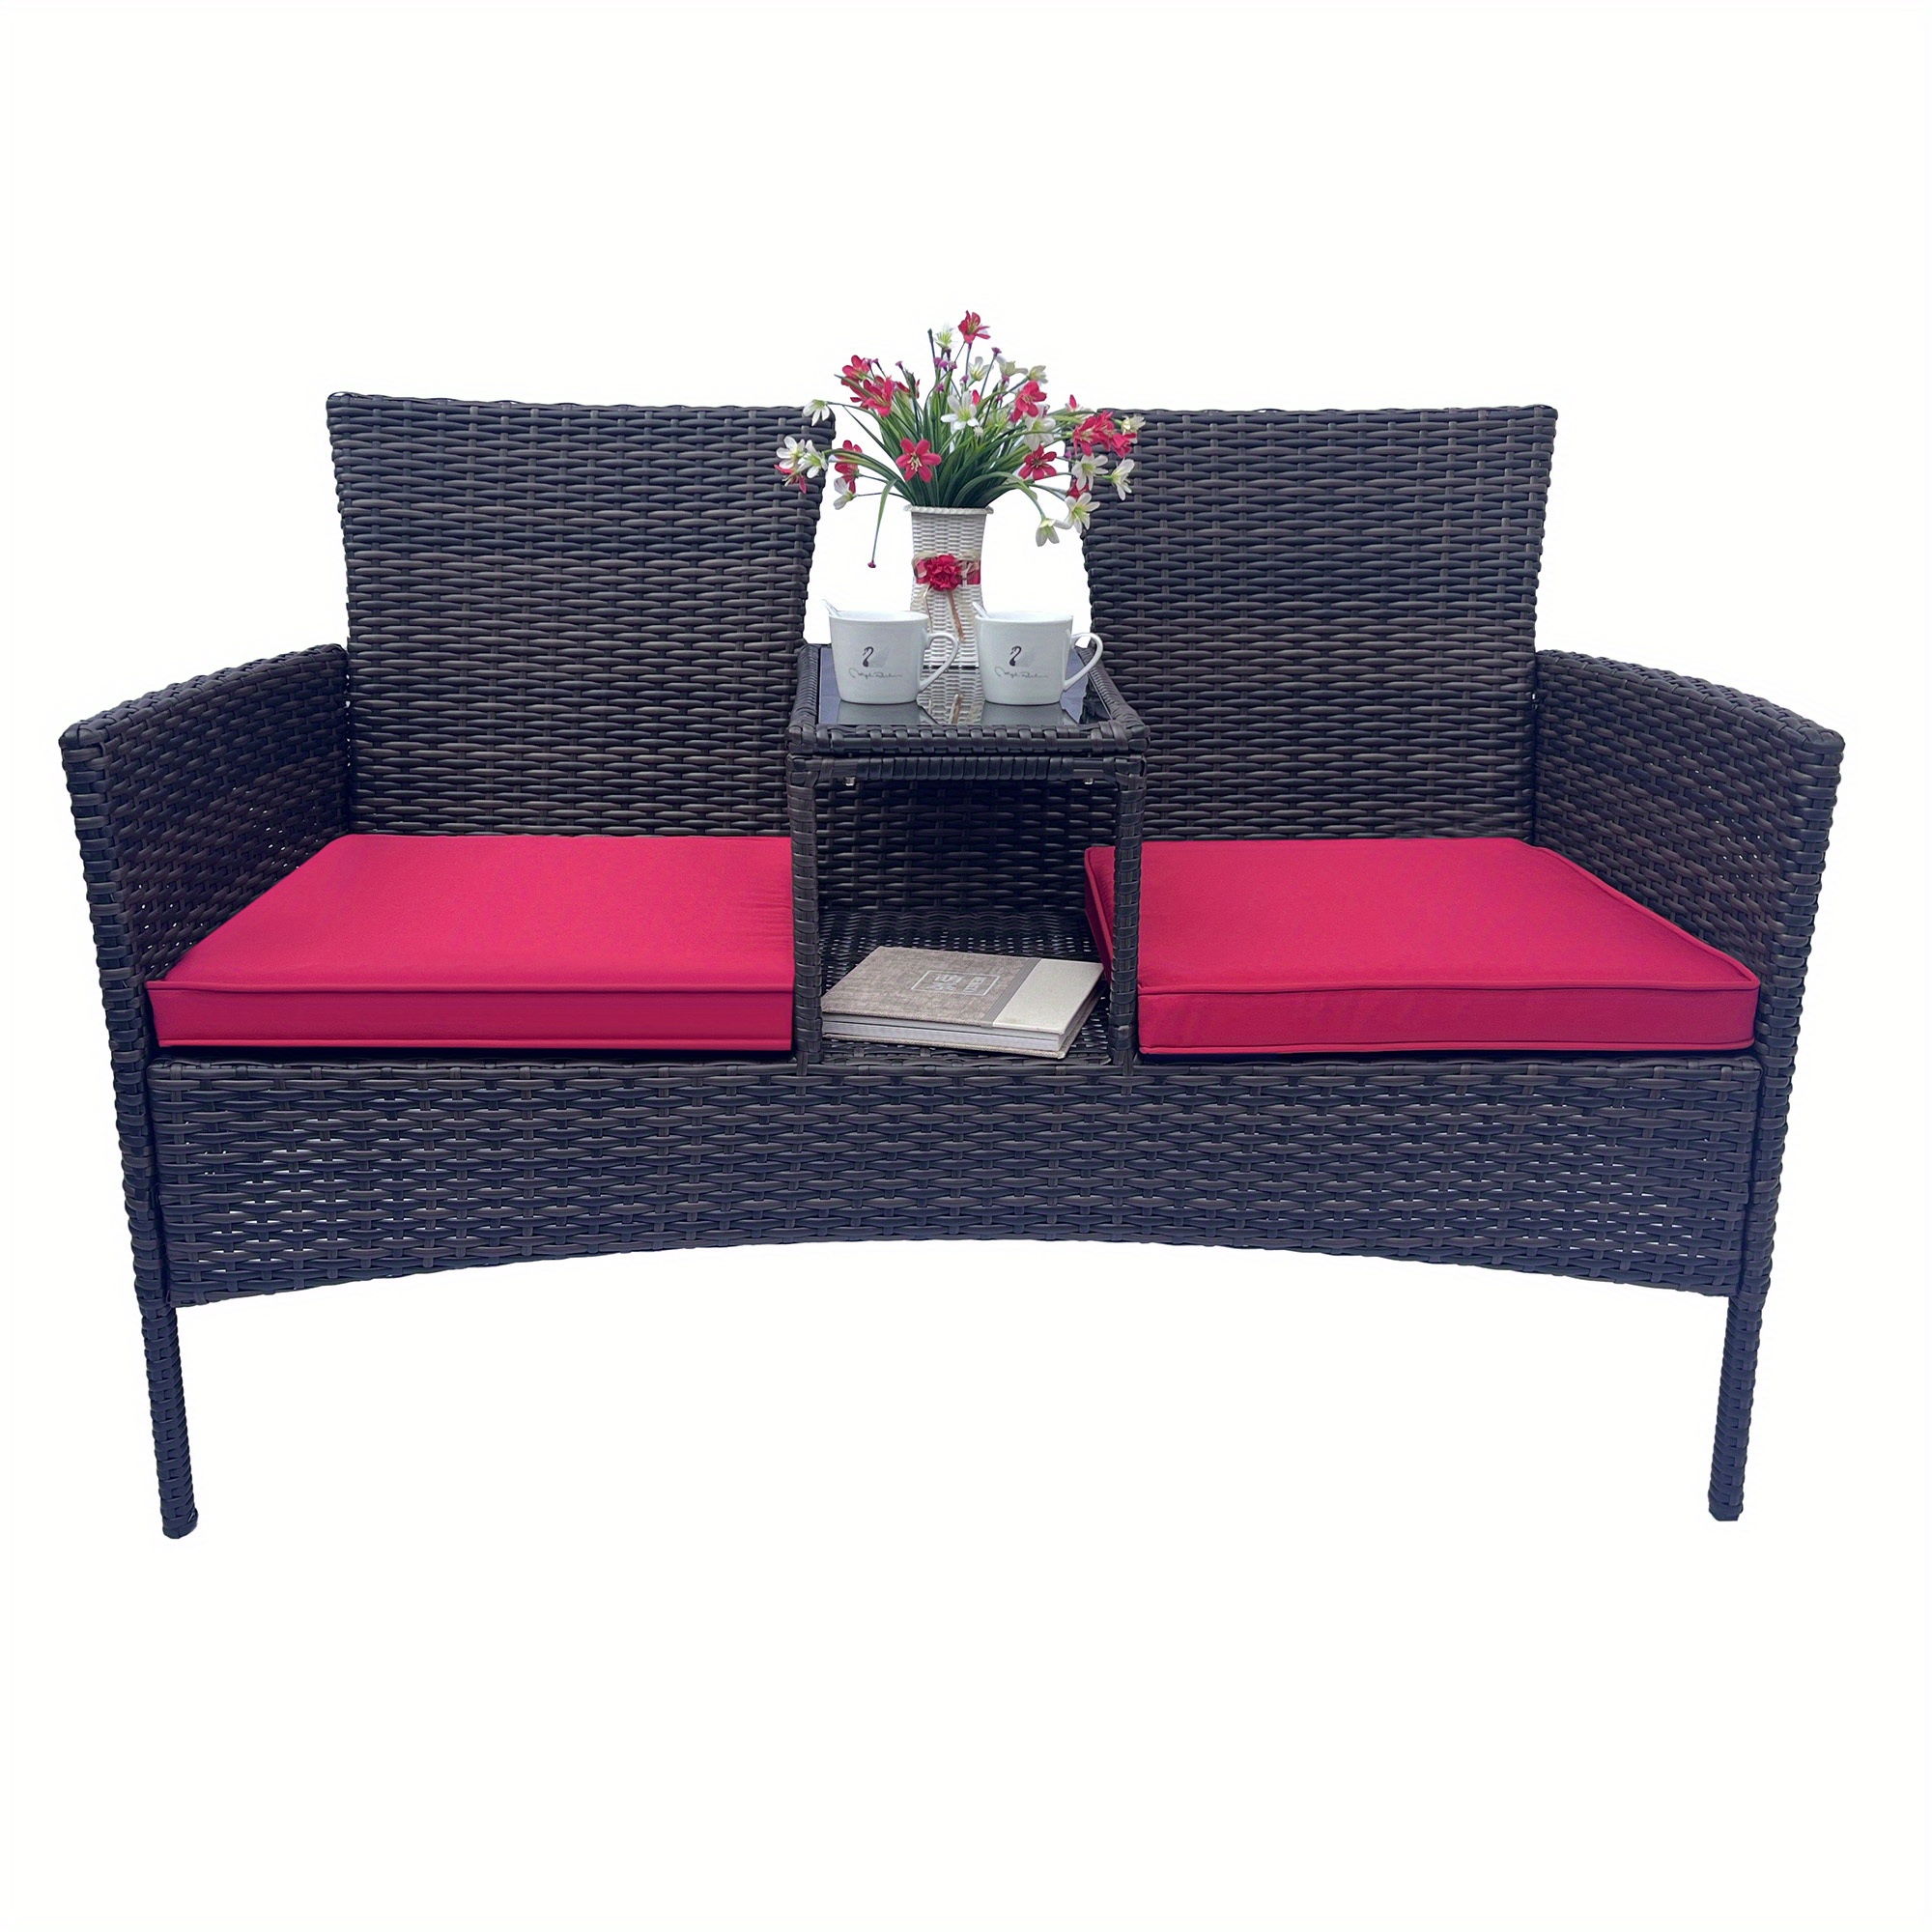 

Black Wicker Patio Dialogue Furniture Set, Outdoor Furniture Set With Removable Cushions And Table, Tempered Glass Countertops, Modern Rattan Bench In The Backyard Of The Garden Lawn